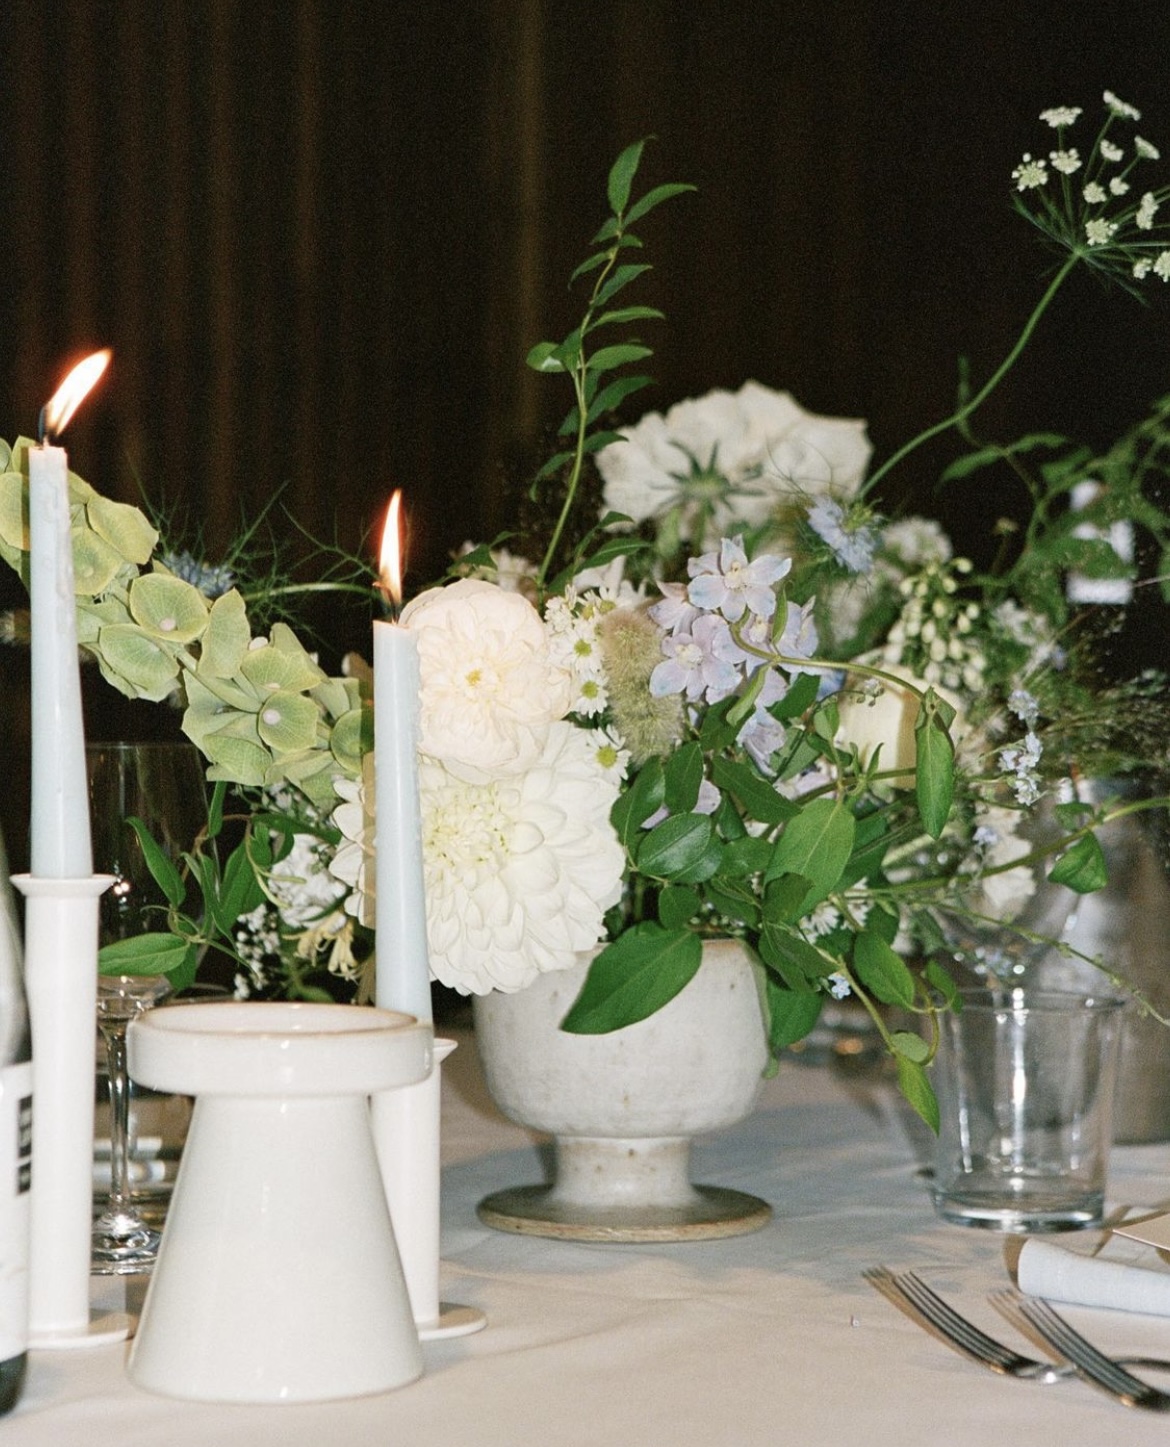 Reception table decor (flowers, white taper candles, white vases and silver cutlery)